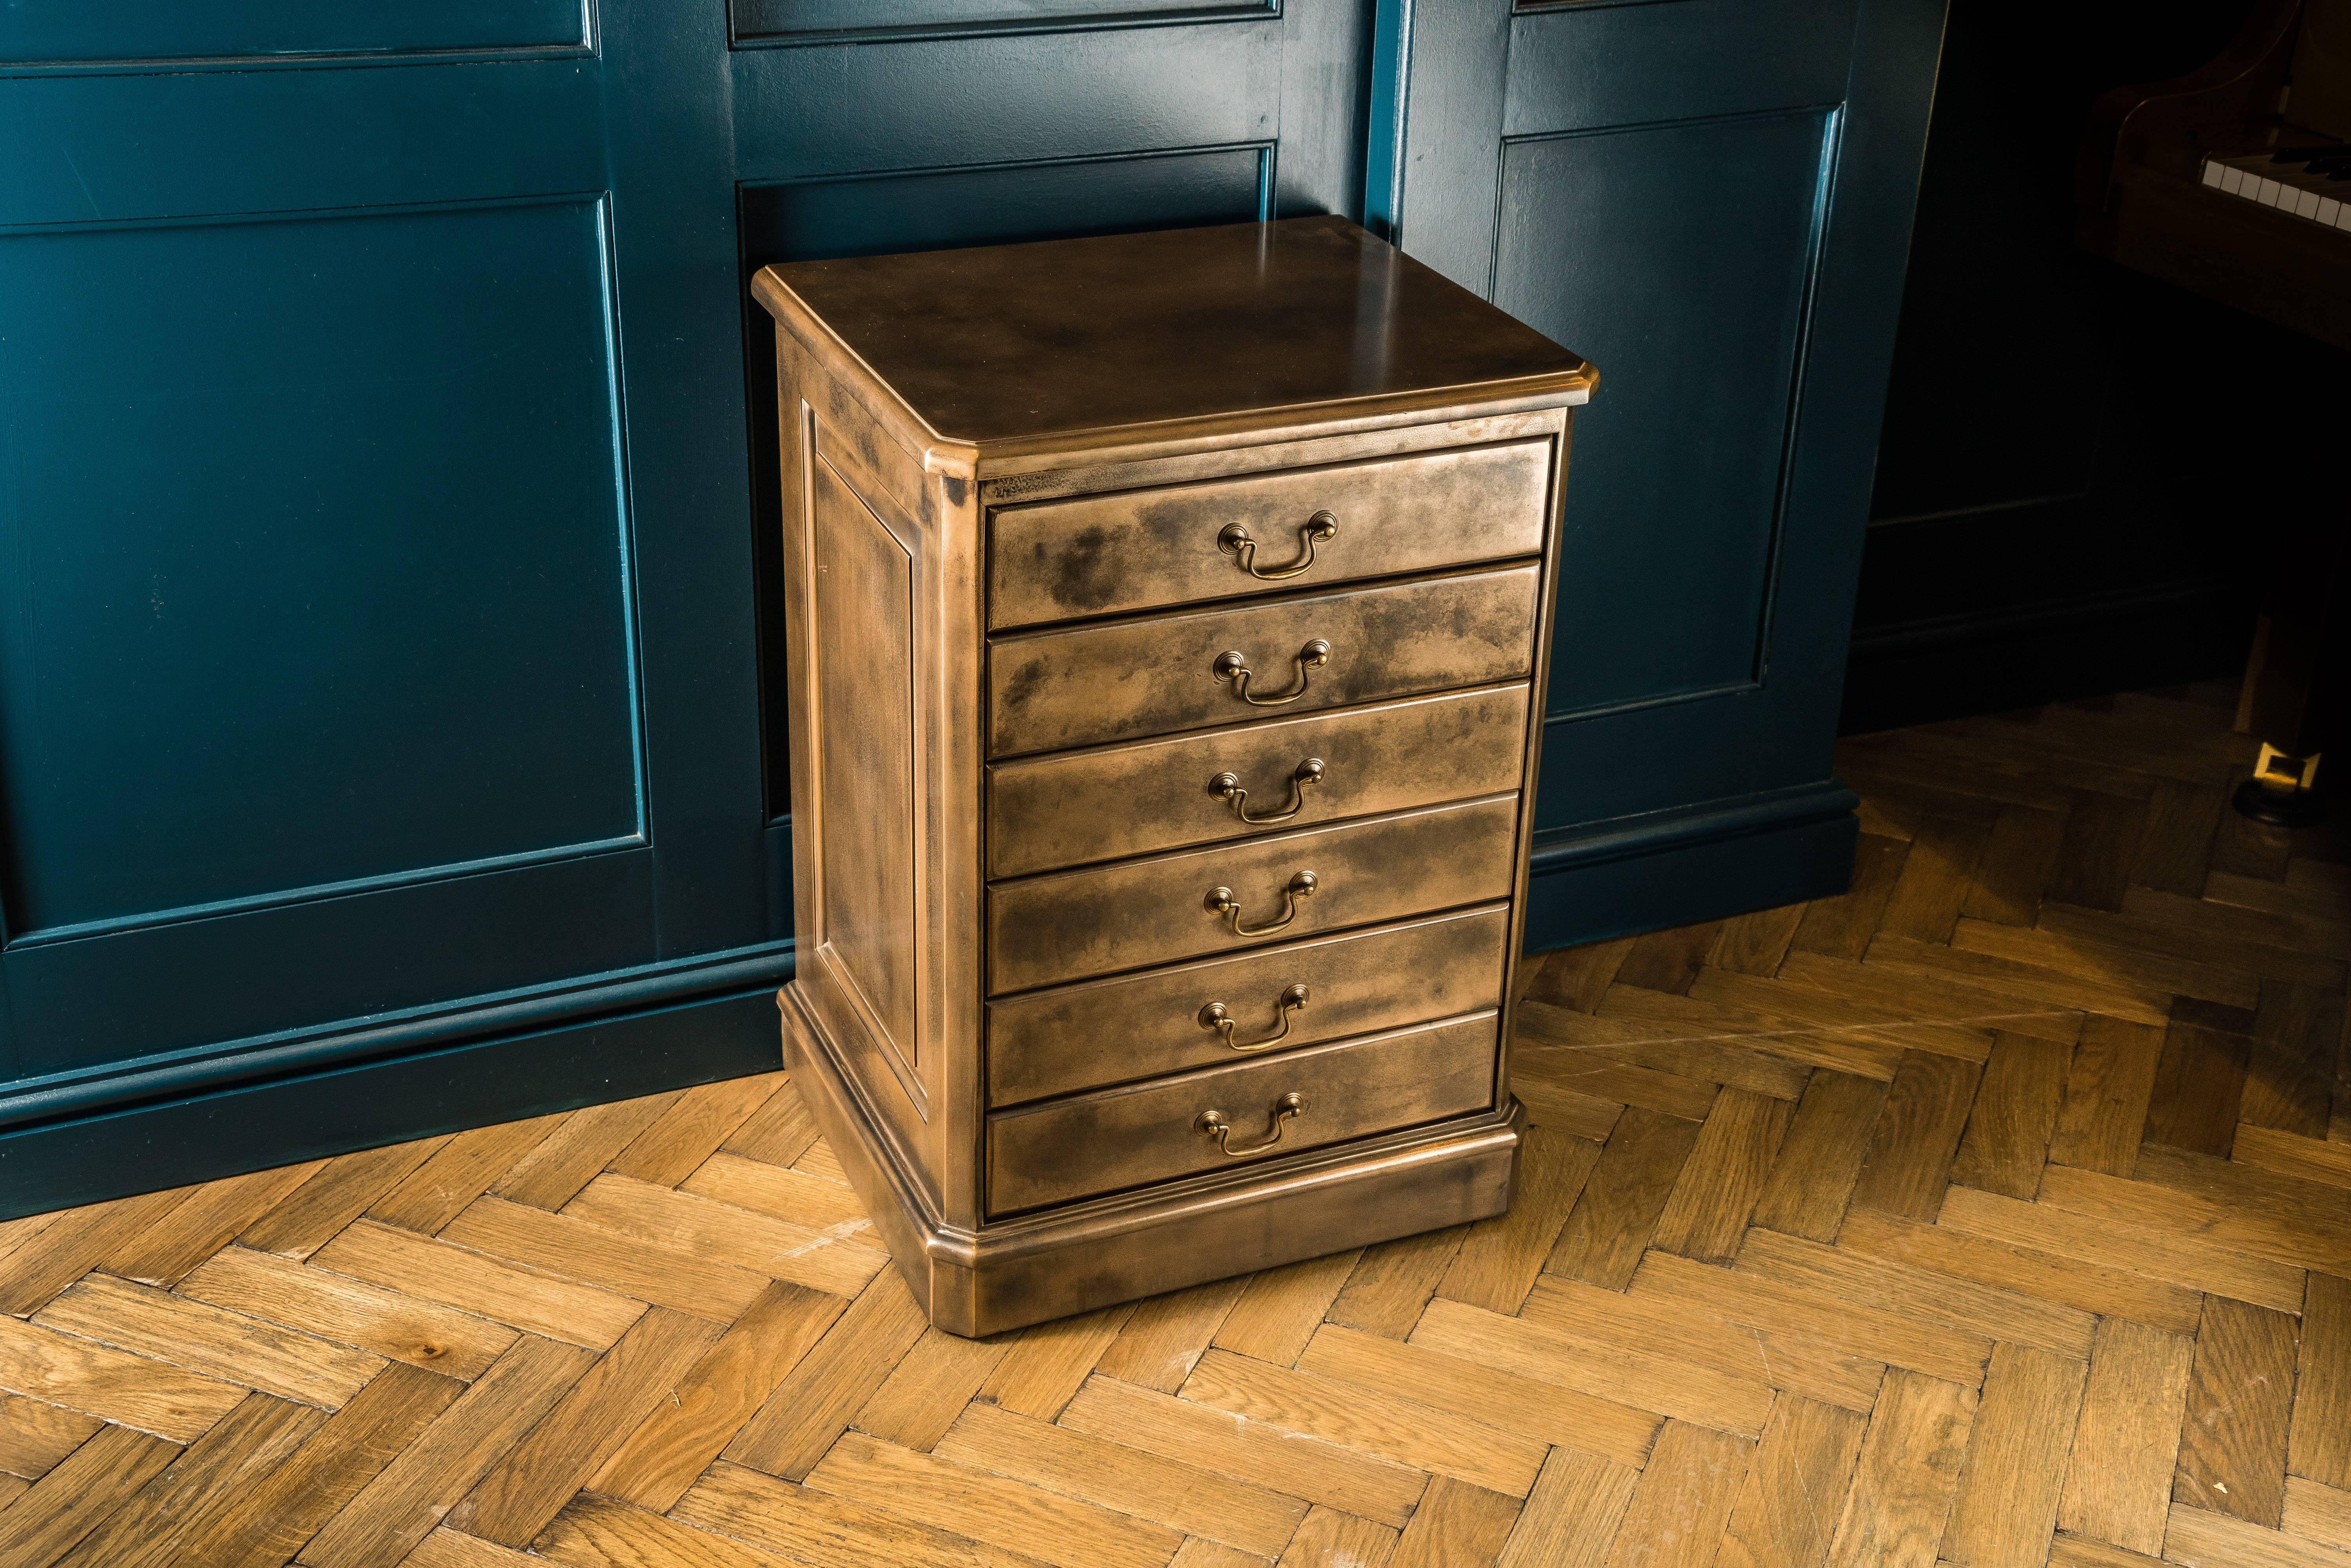 A unique opportunity to acquire an elegant six-drawer music cabinet with a truly modern finish. 

This cabinet was handcrafted in the UK. It is made out of solid mahogany and has six drawers. Each drawer features elegant brass handles and fold